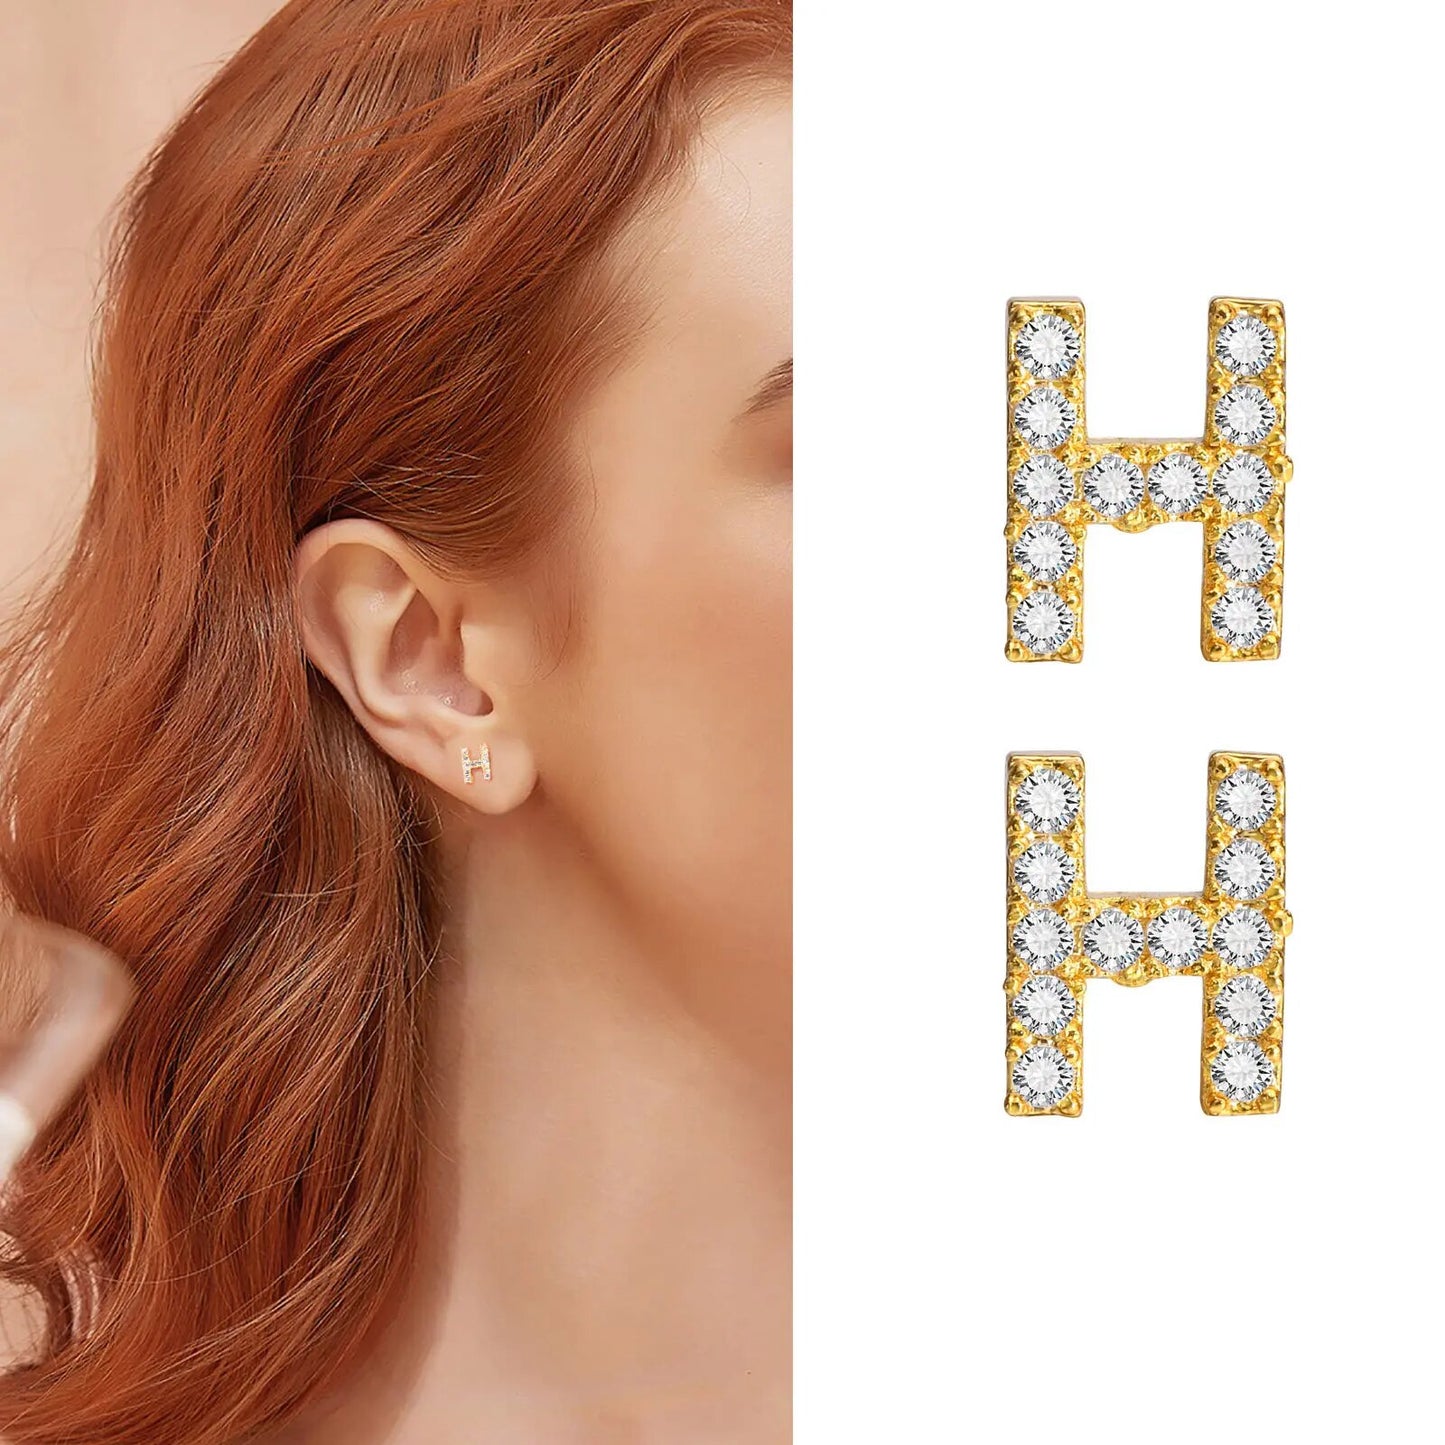 Women's Earrings Aretes para mujeres Delicate Bling 26 A-Z Initial Letter Stud Earrings for Women Girls, Small Gold Color Alphabet Name Earring Piercing Jewelry